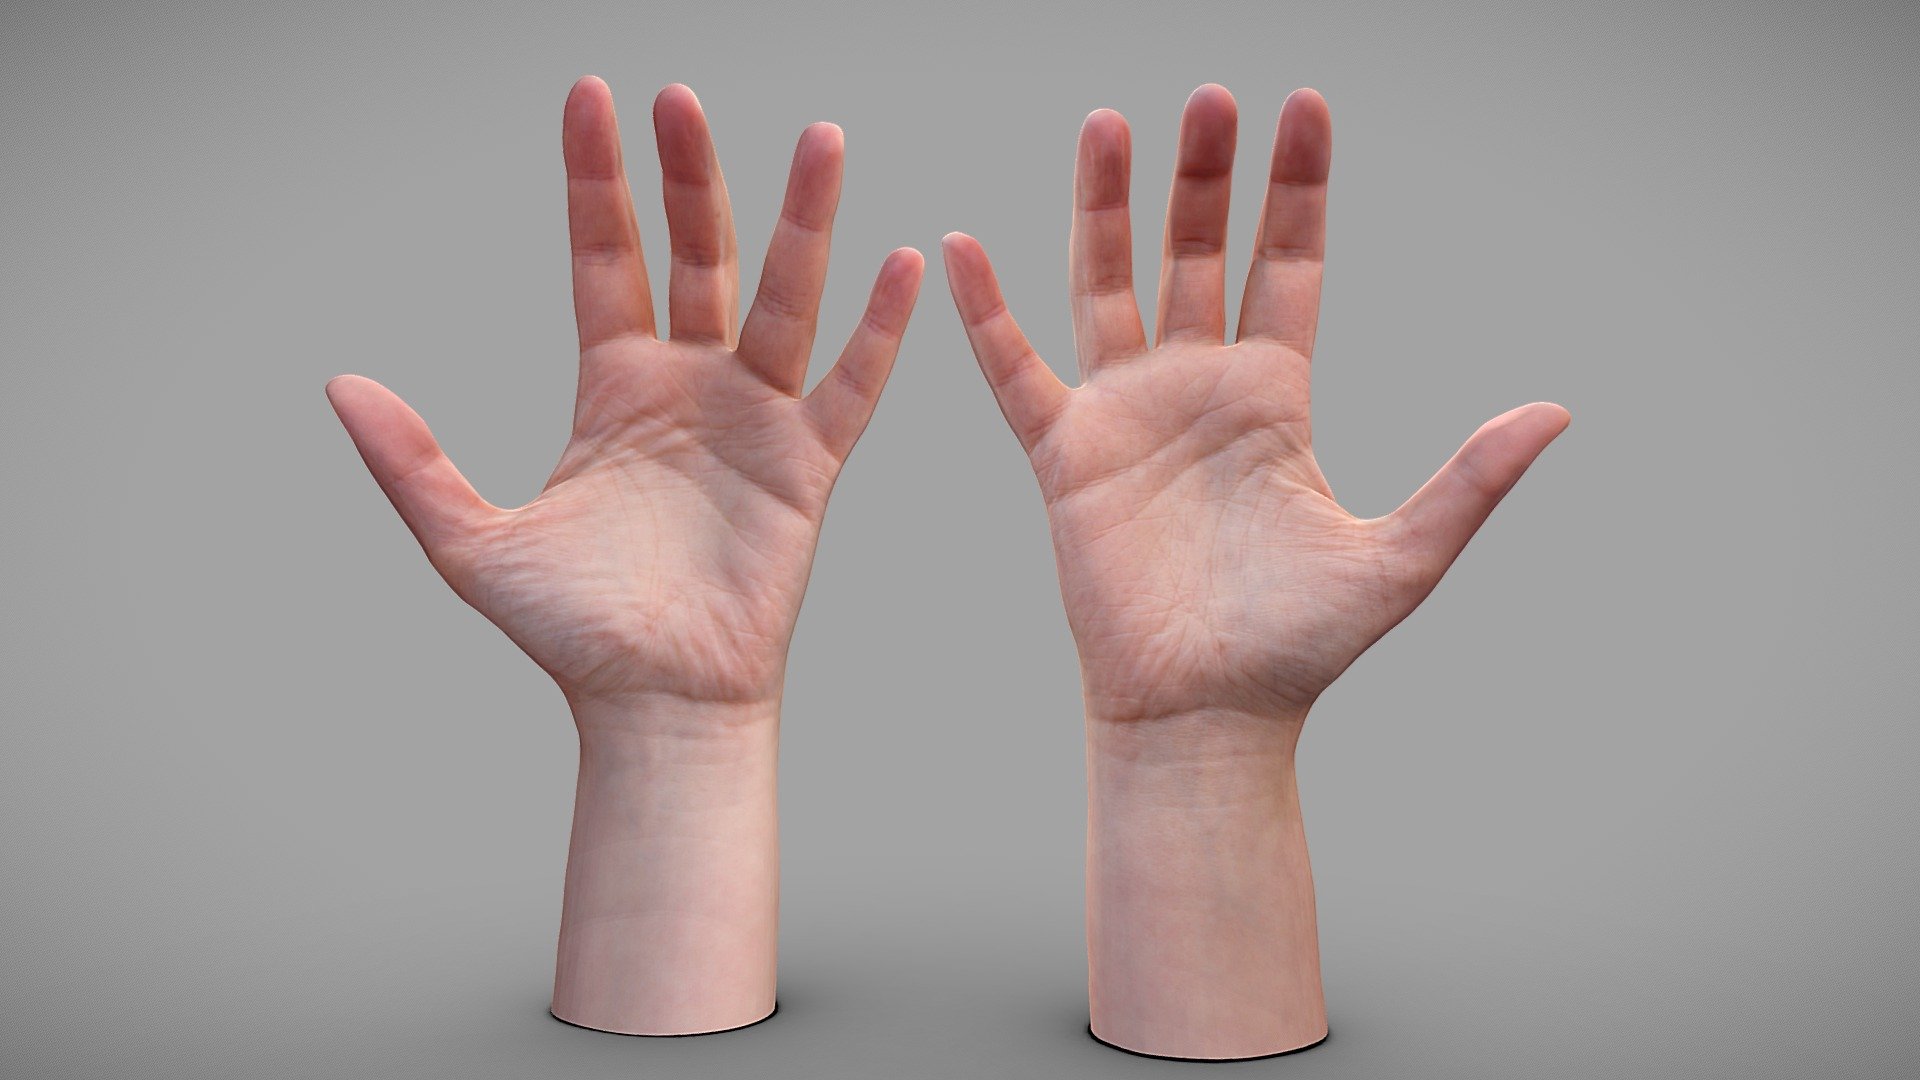 41 years old female hands.

Photos taken with A7Riv + 20mm Sony FE

Processed with Metashape + Blender + Wrap3 - Female hands - Buy Royalty Free 3D model by Lassi Kaukonen (@thesidekick) 3d model